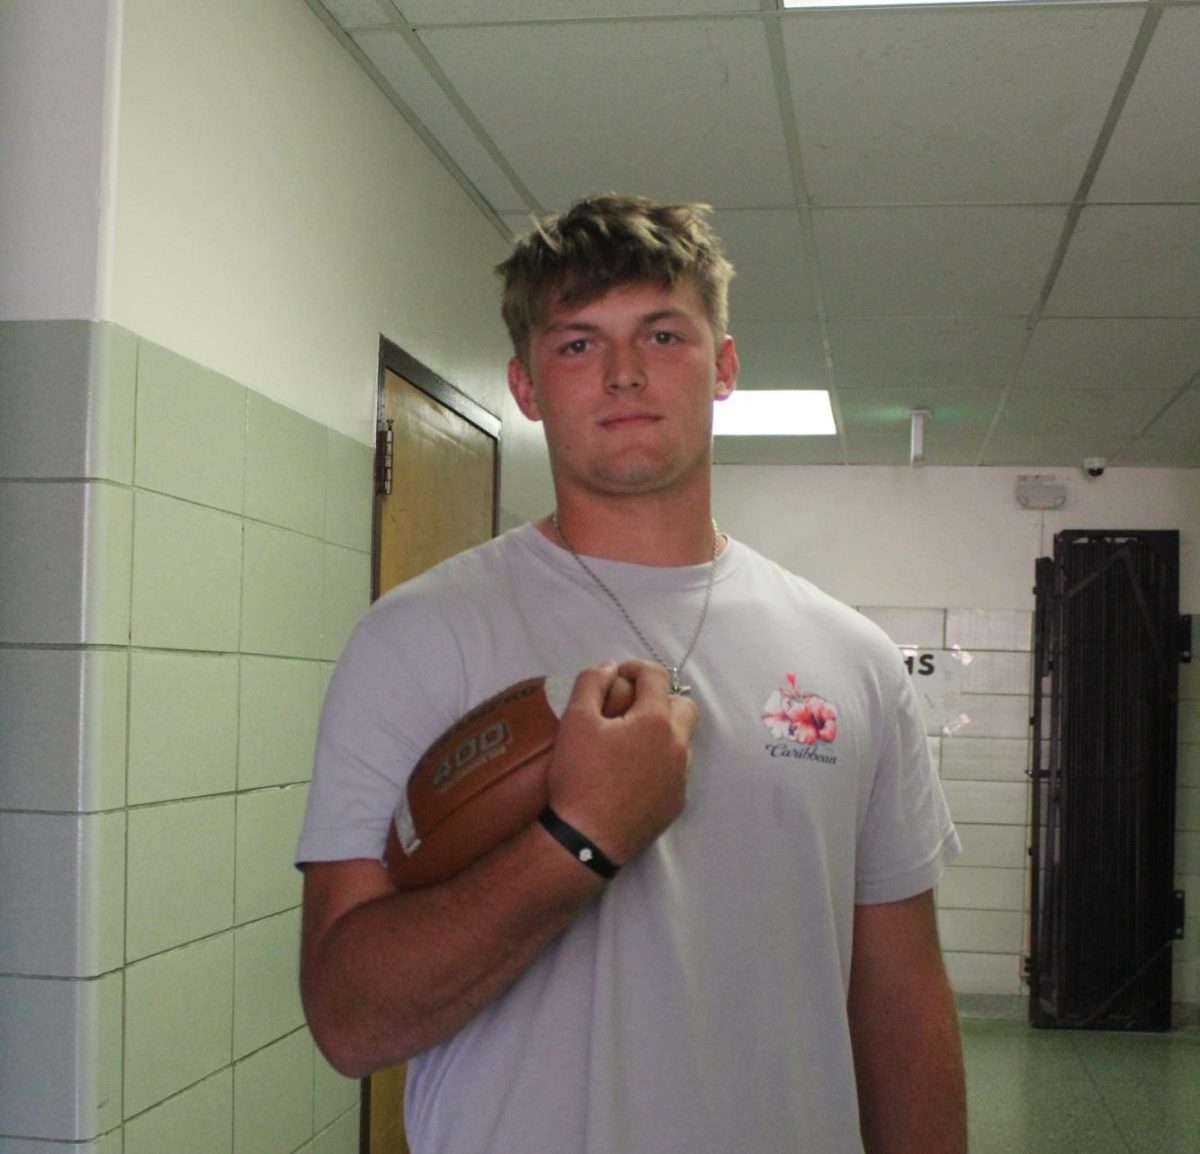 GJHS+junior+Will+Applegate+is+the+quarterback+of+the+football+team.+The+next+football+game+is+on+Thursday%2C+Sept.+7.